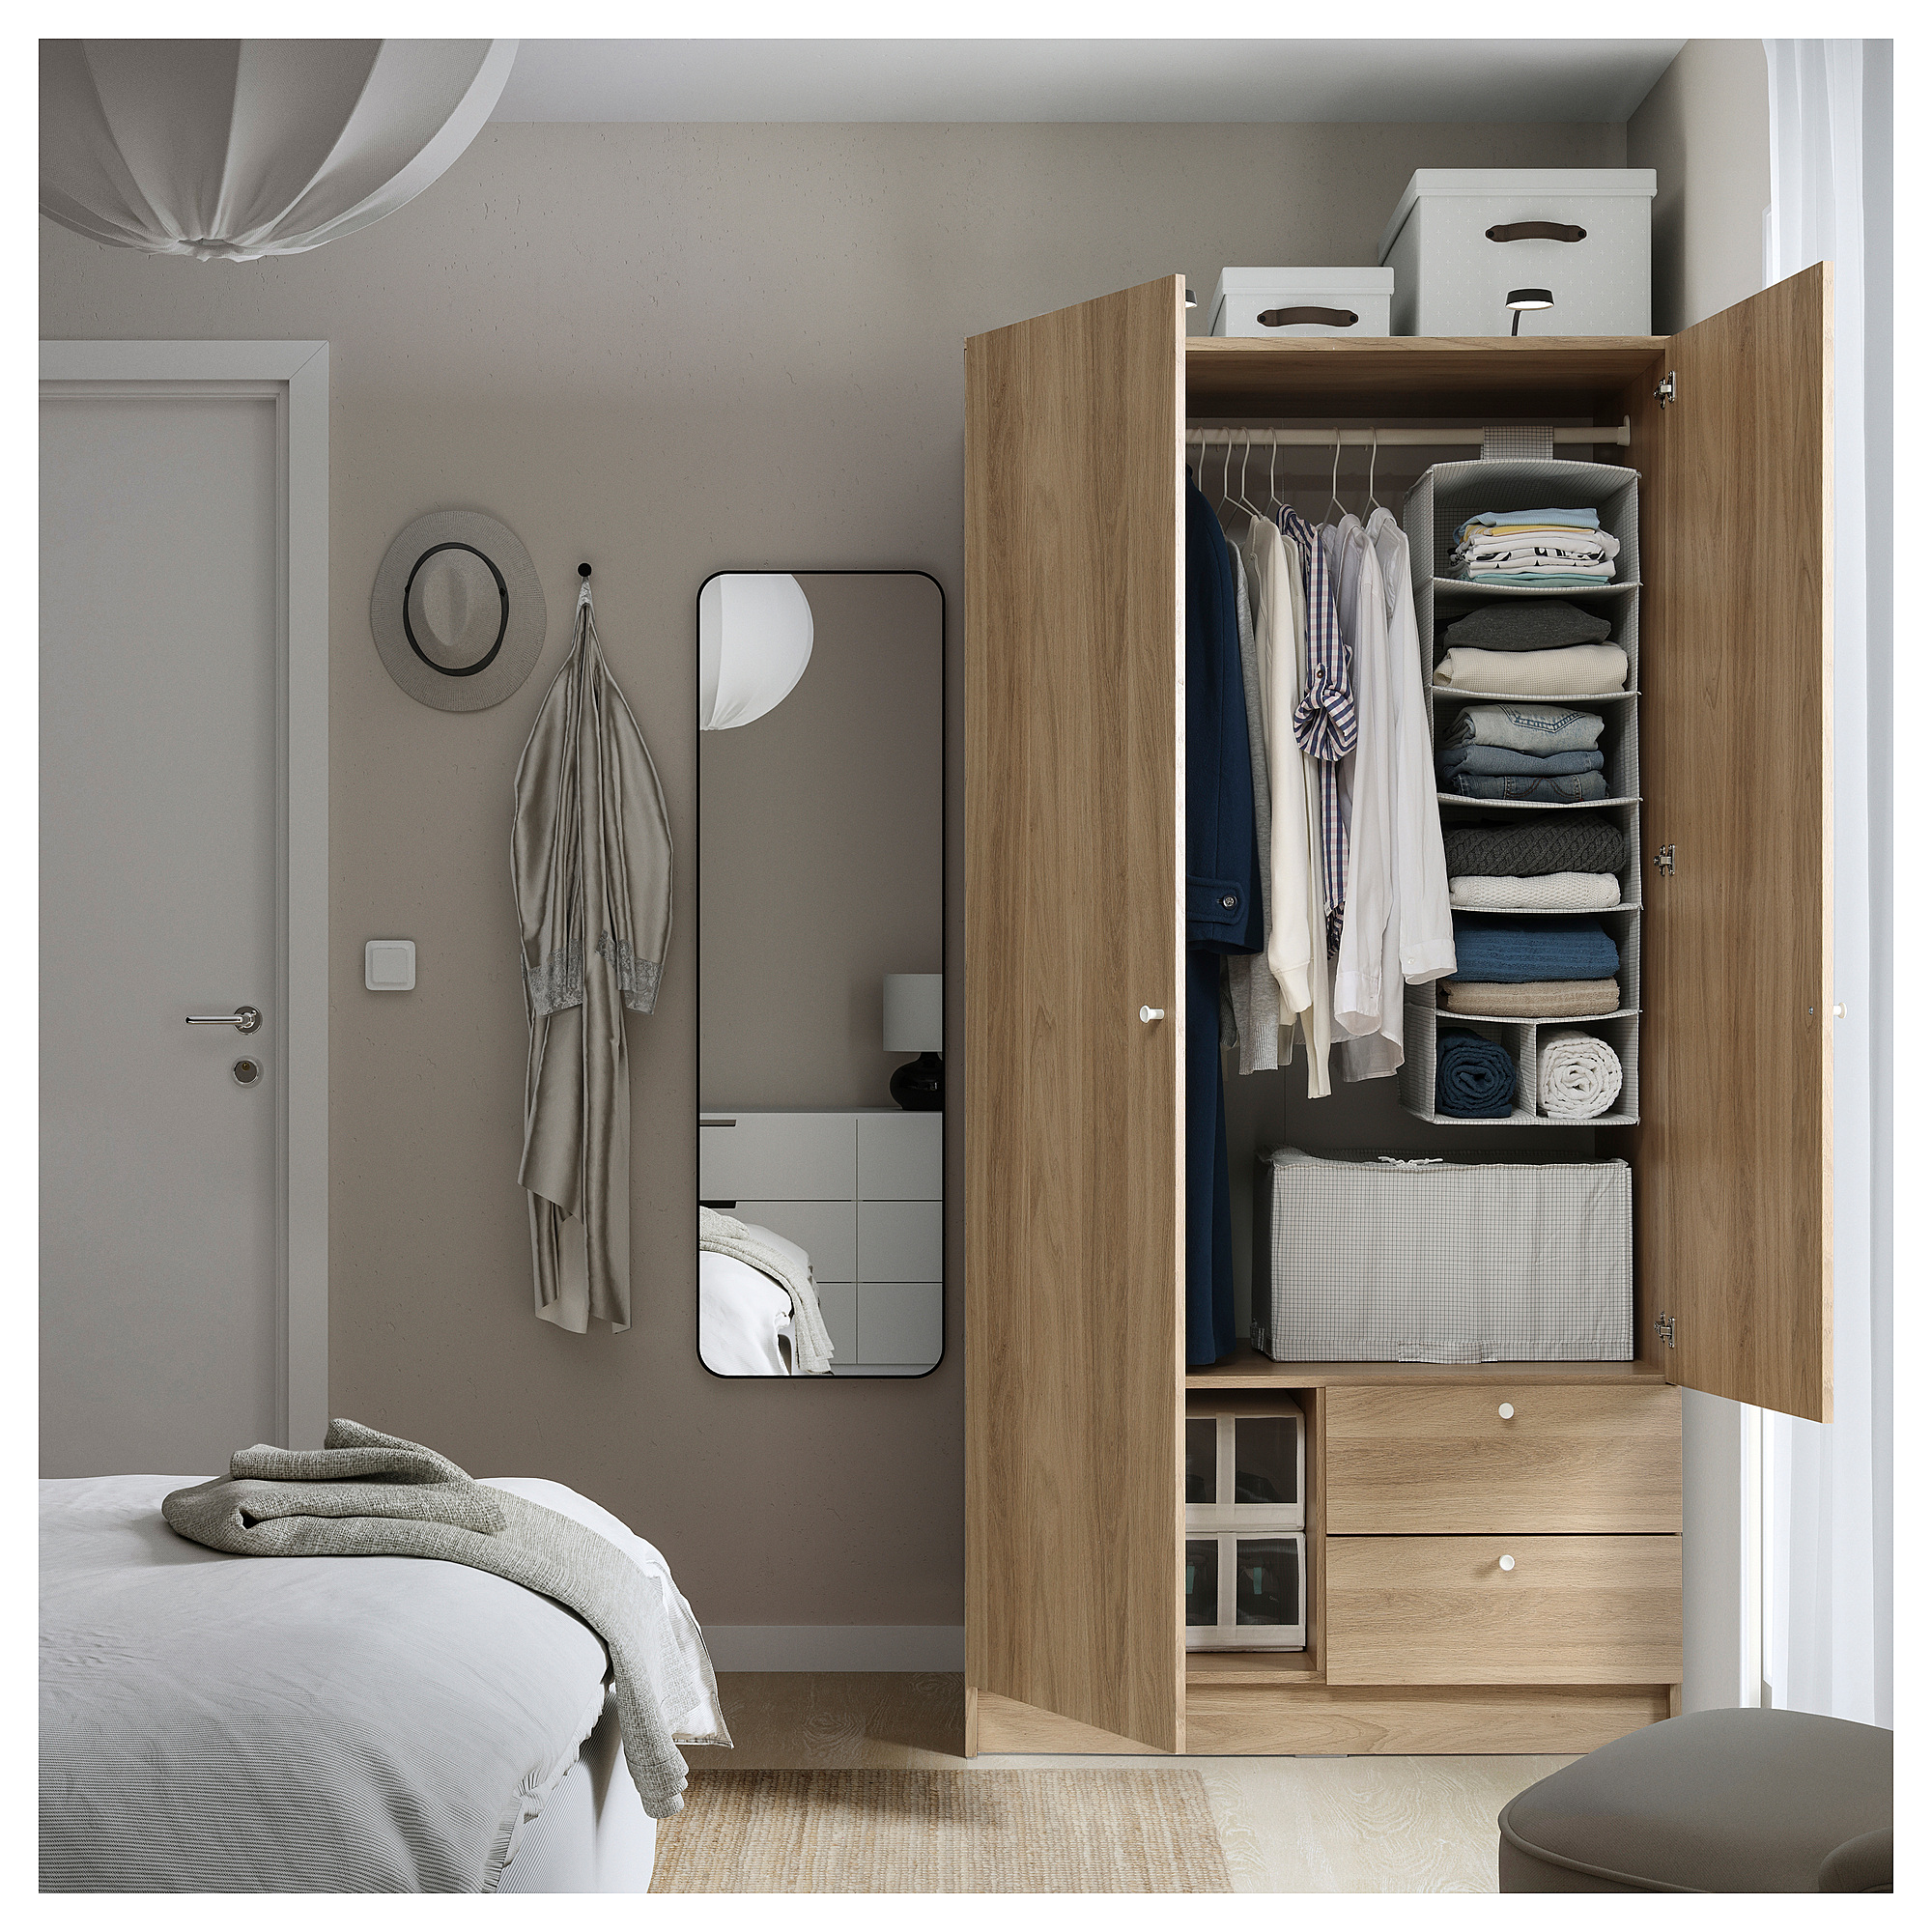 VILHATTEN wardrobe with 2 doors and 2 drawers